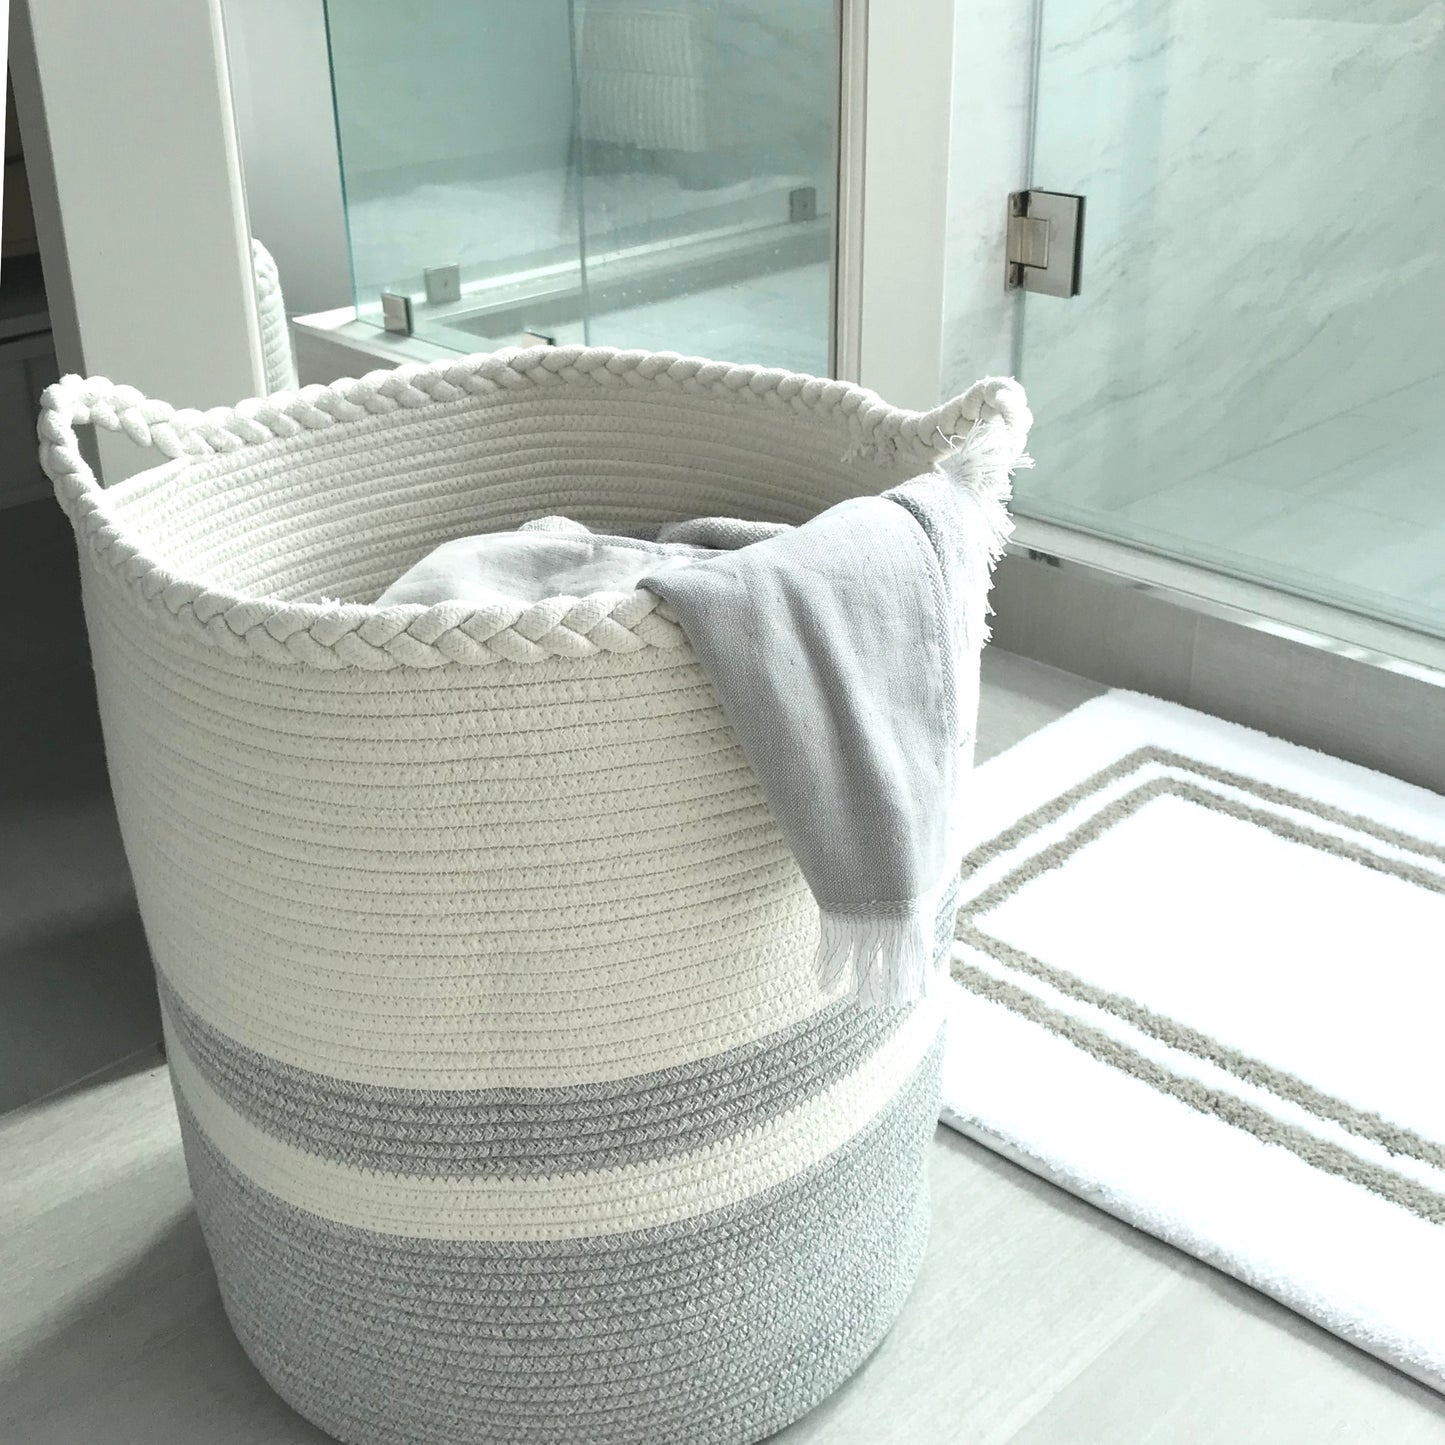 Woven Laundry Basket - Tall